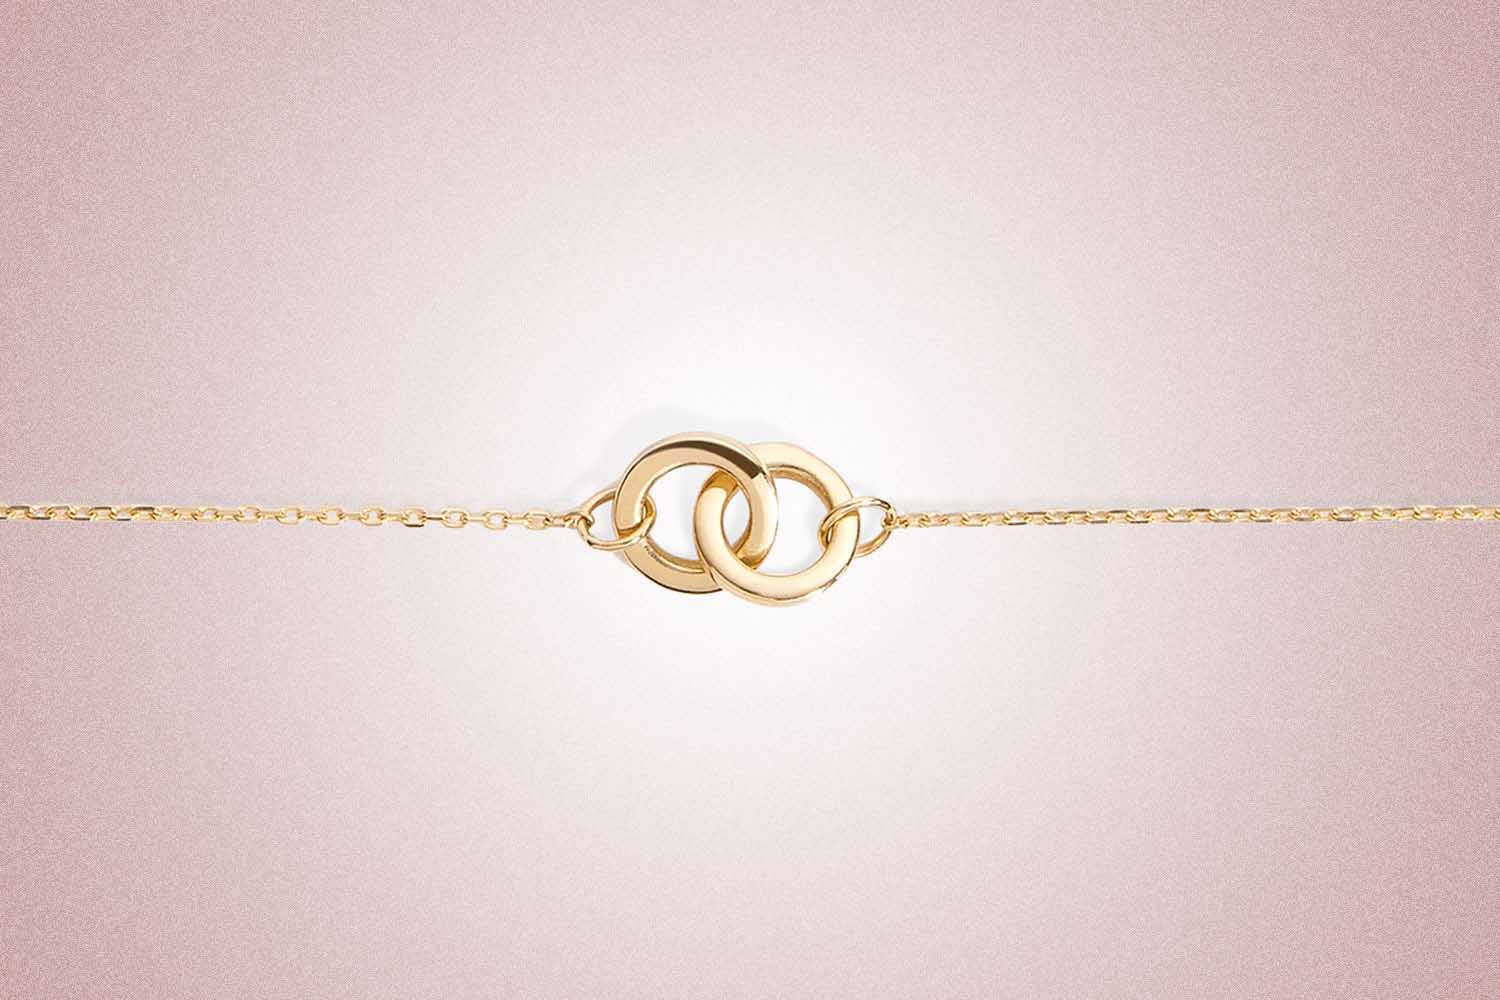 A gold chain bracelet with two interlocking loops at the center from Aurate, a perfect valentine's day gift, on a pink background